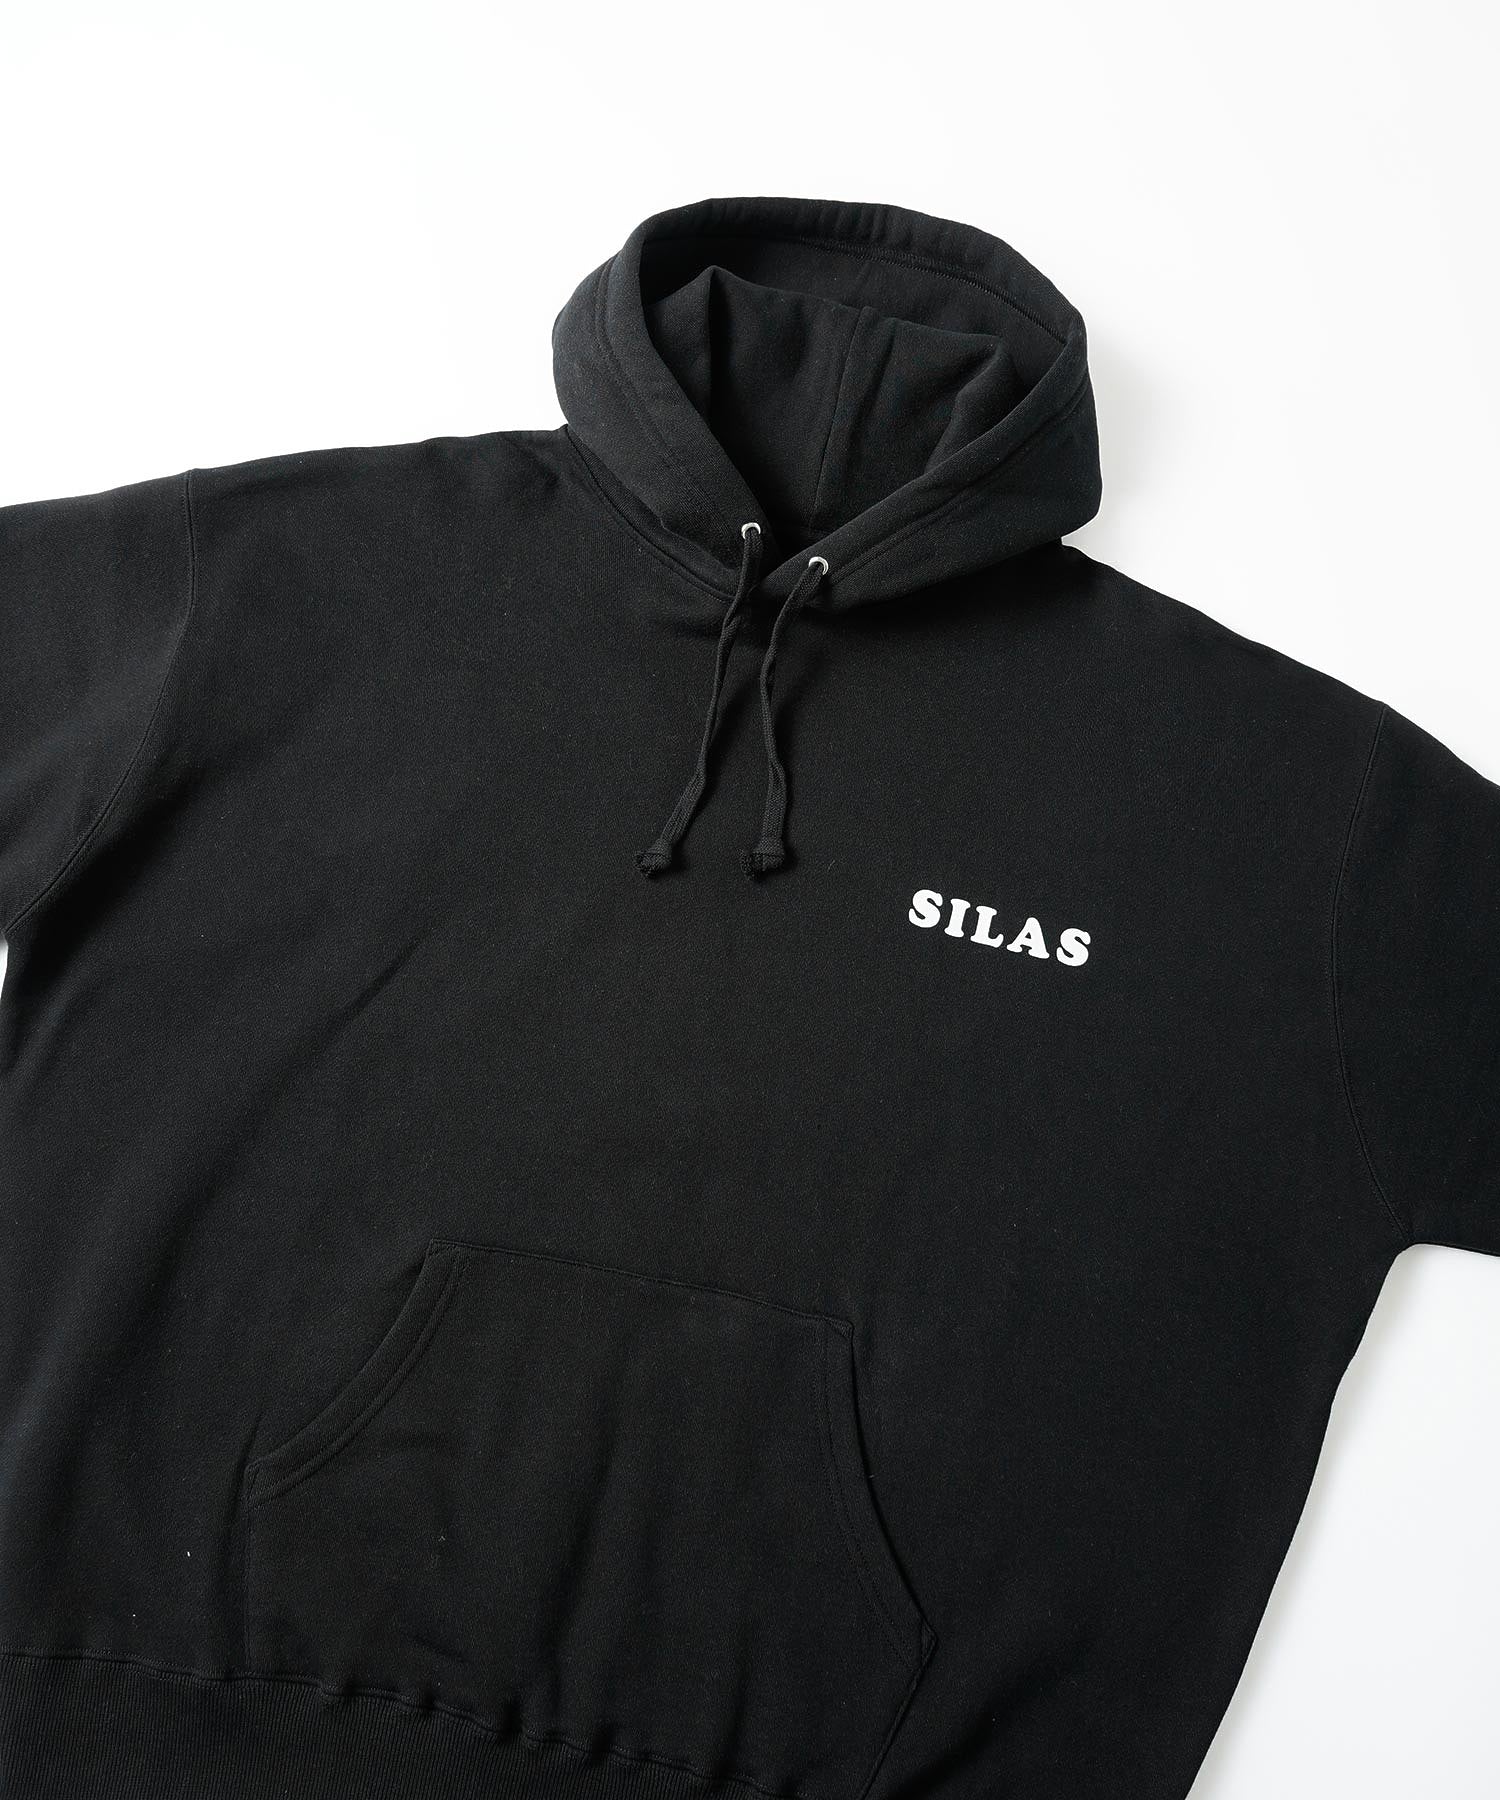 ROUNDED LOGO SWEAT HOODIE